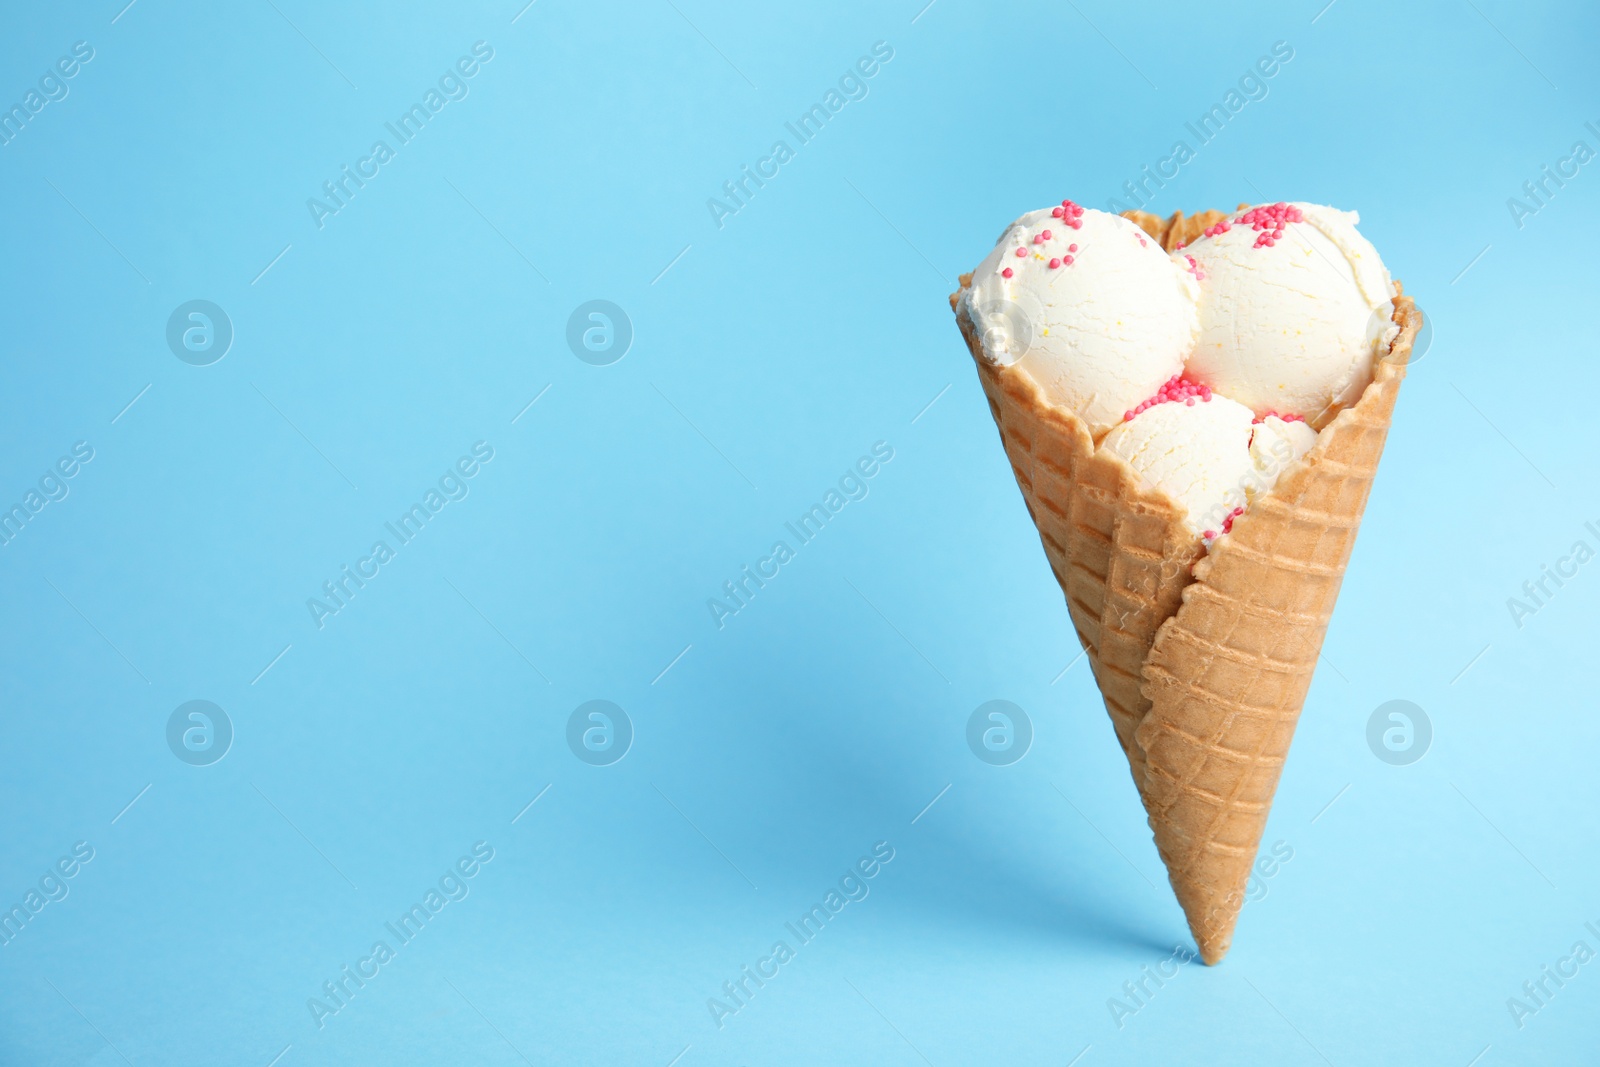 Photo of Delicious vanilla ice cream in wafer cone on blue background. Space for text